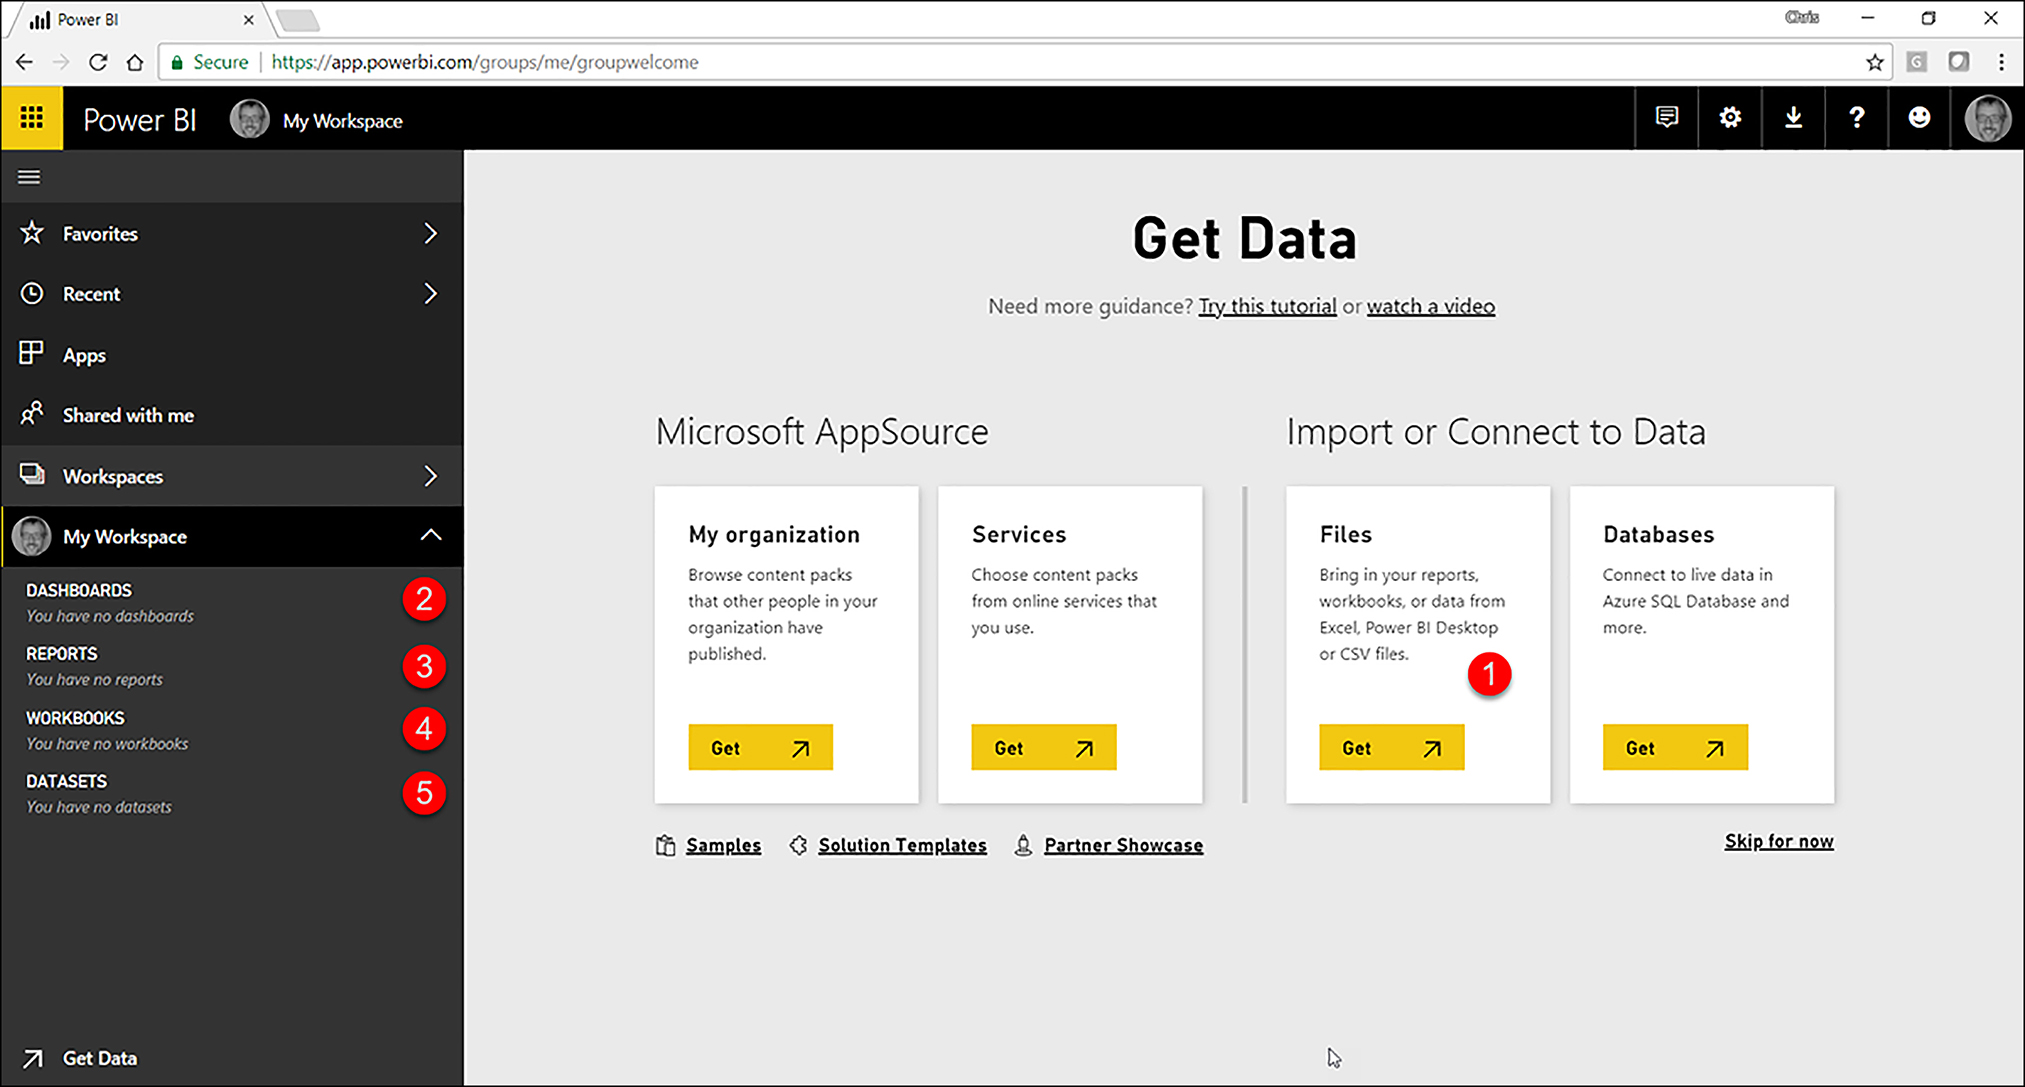 Power BI Service interface. For this exam we will use the Get Data functionality to integrate between Excel and Power BI. The relevant parts of the service for purposes of this book are shown in the following list.